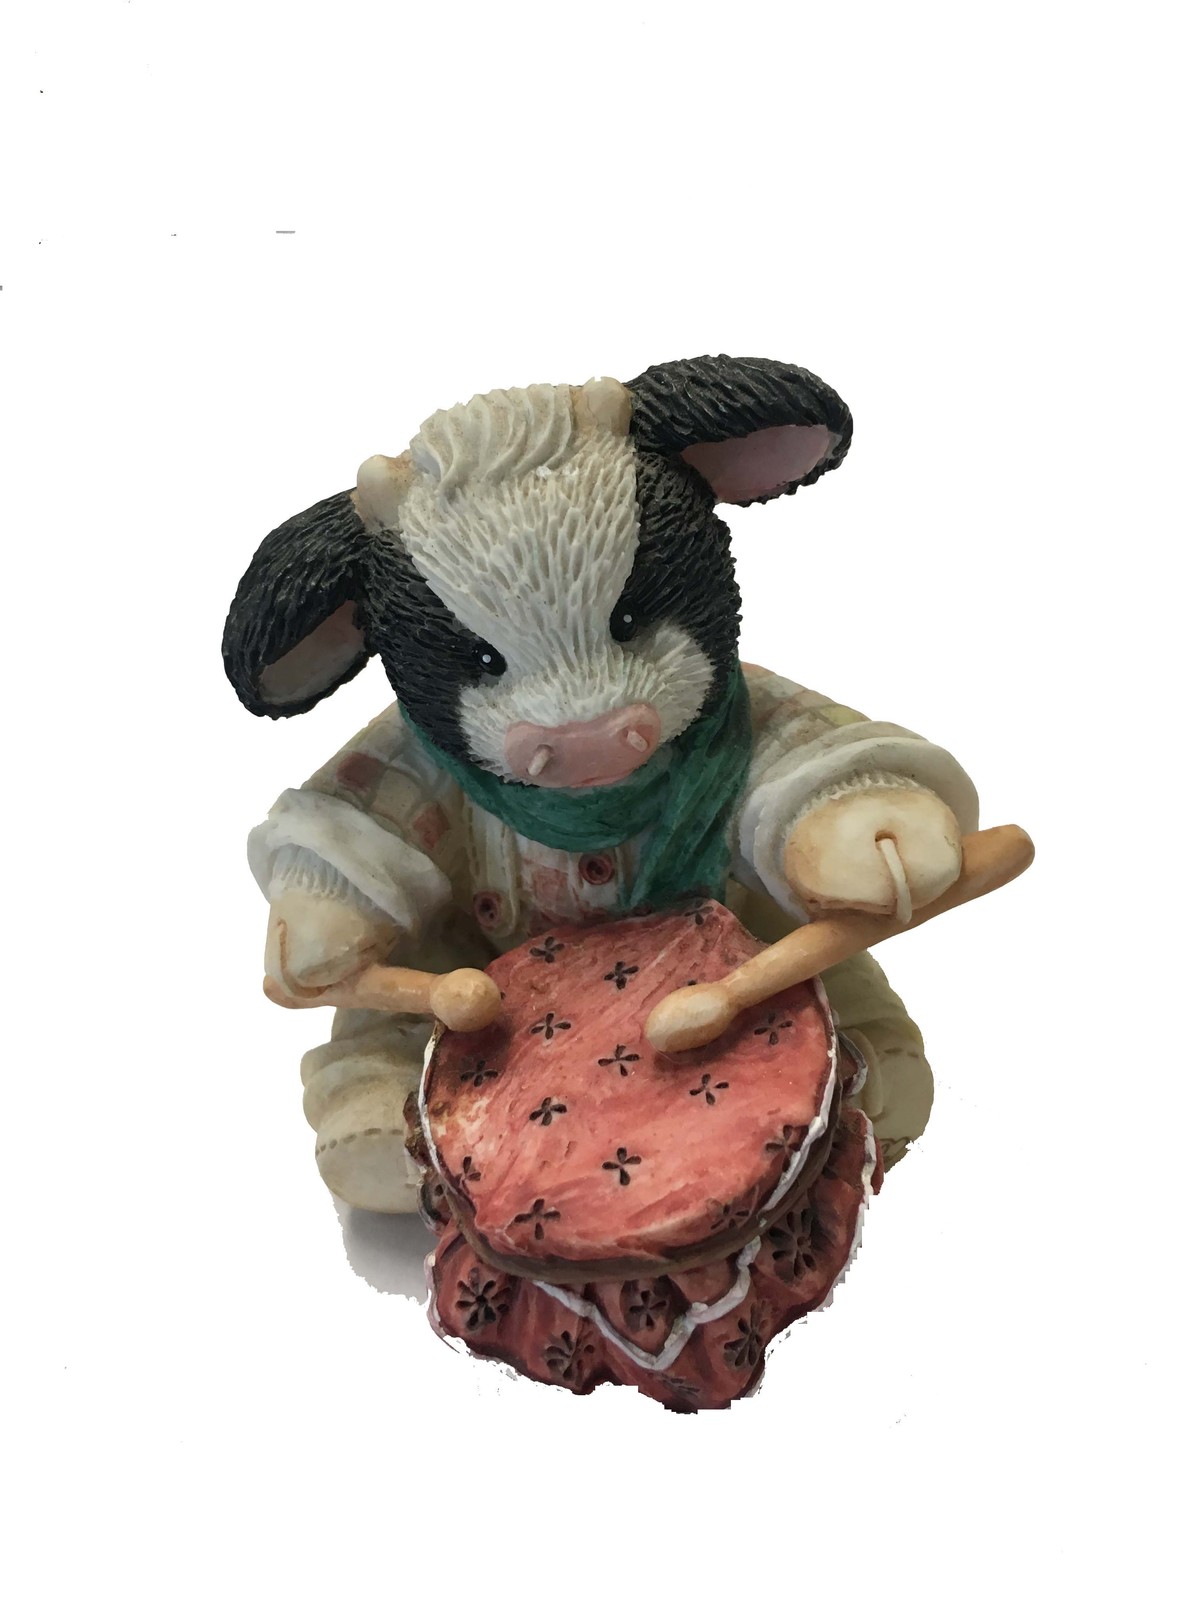 Primary image for MARY RHYNER 1994 "LITTLE DRUMHERD bOY" CERAMIC ORNAMENT BY ENESCO CORP.